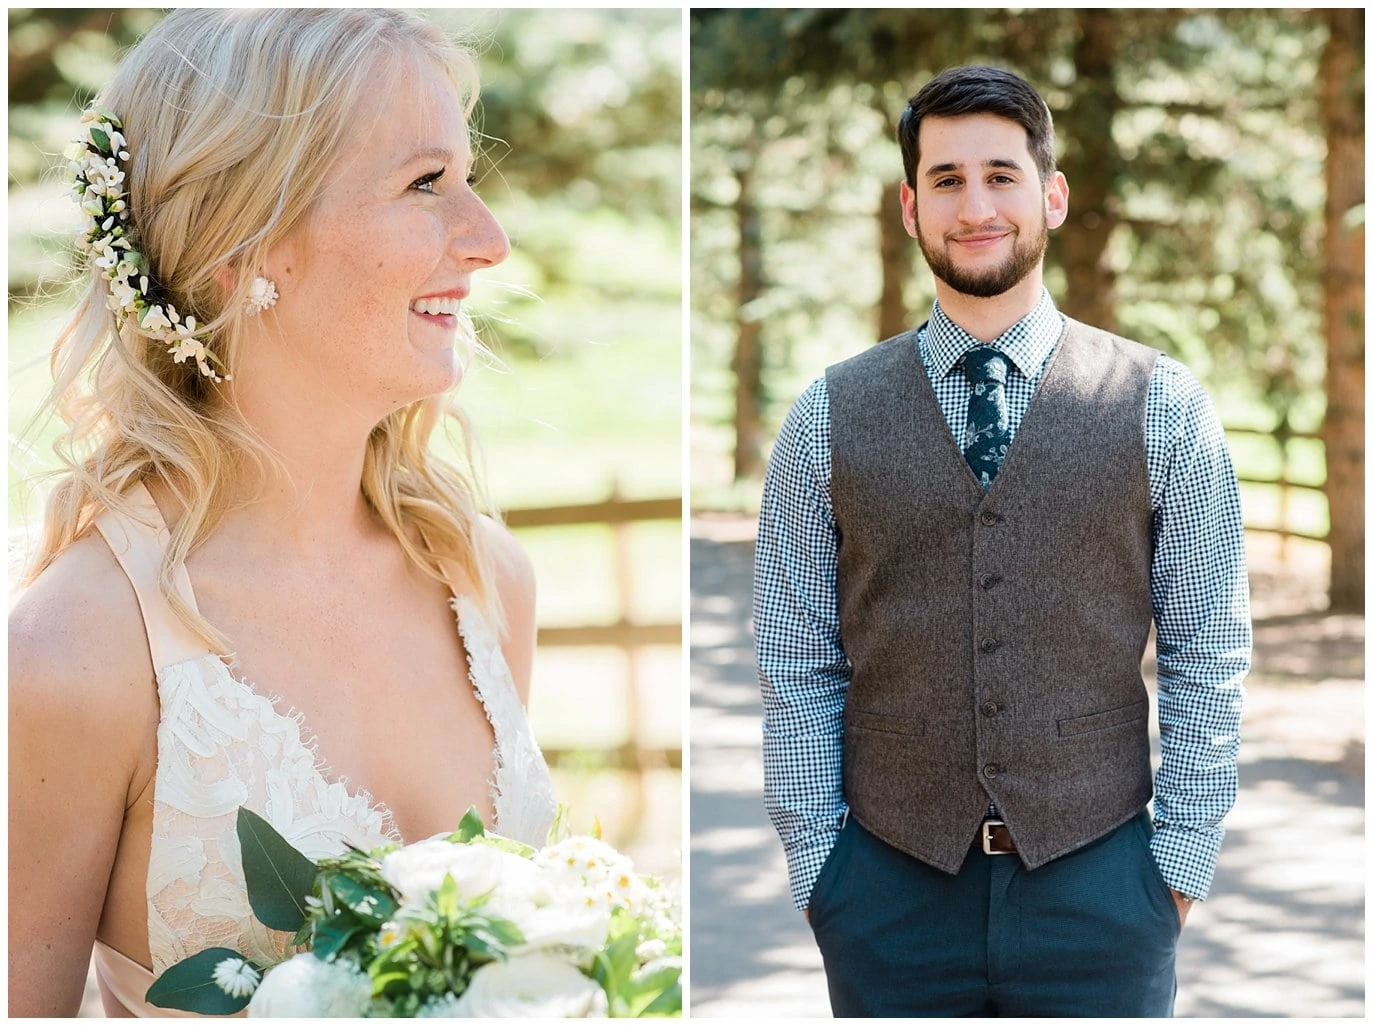 flower bridal hairpiece and groom with flowered tie at Deer Creek Valley Ranch wedding by Deer Creek Valley Ranch Wedding Photographer Jennie Crate Photographer